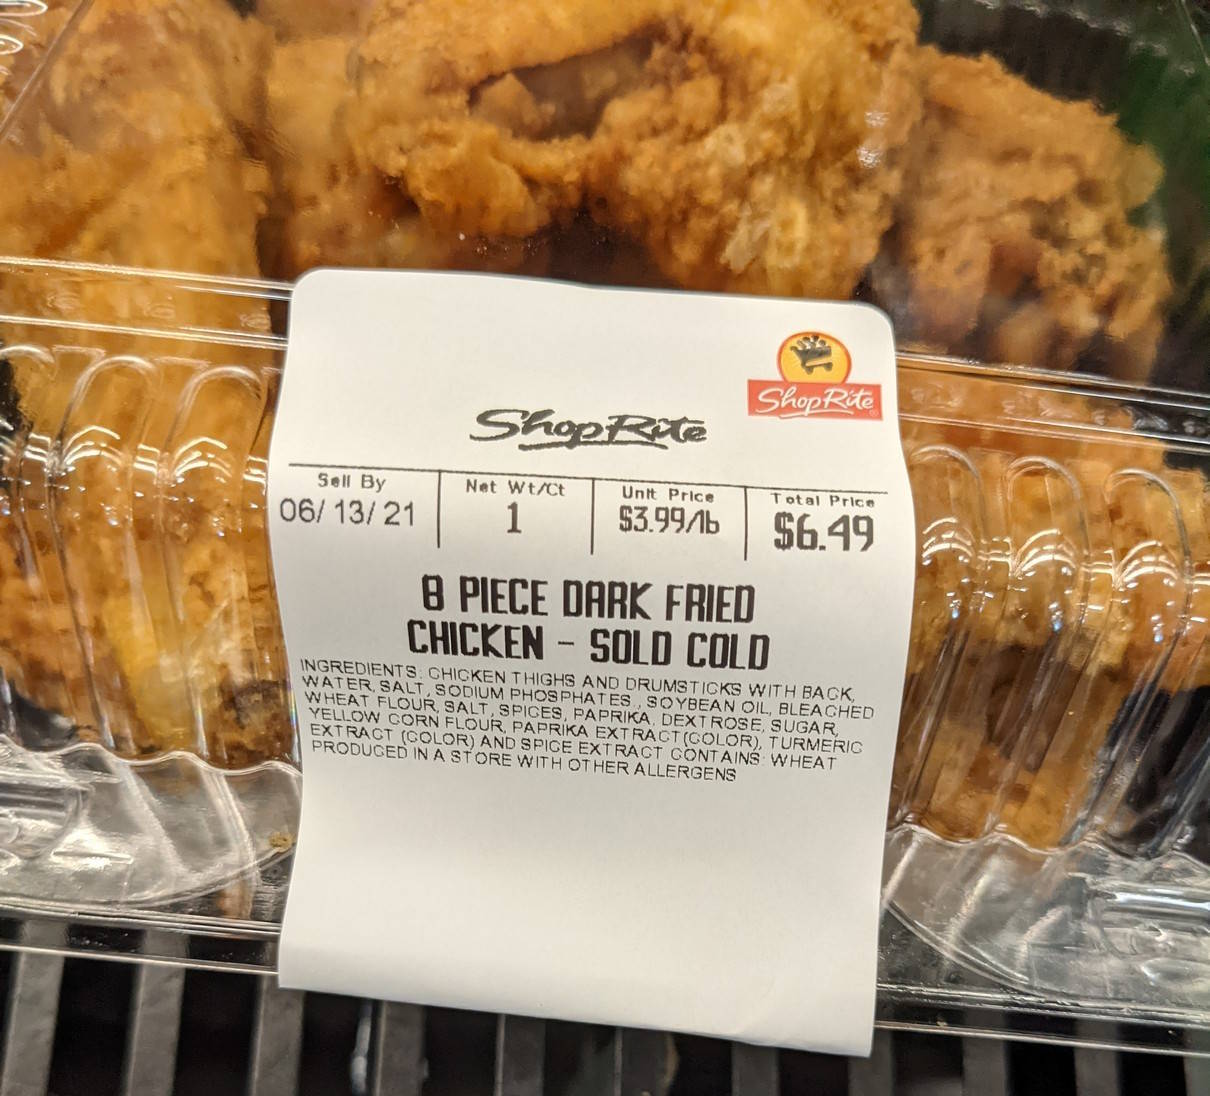 Close-up of a fried chicken box with a sell-by in June 2021, $6.49 for 8 pieces.